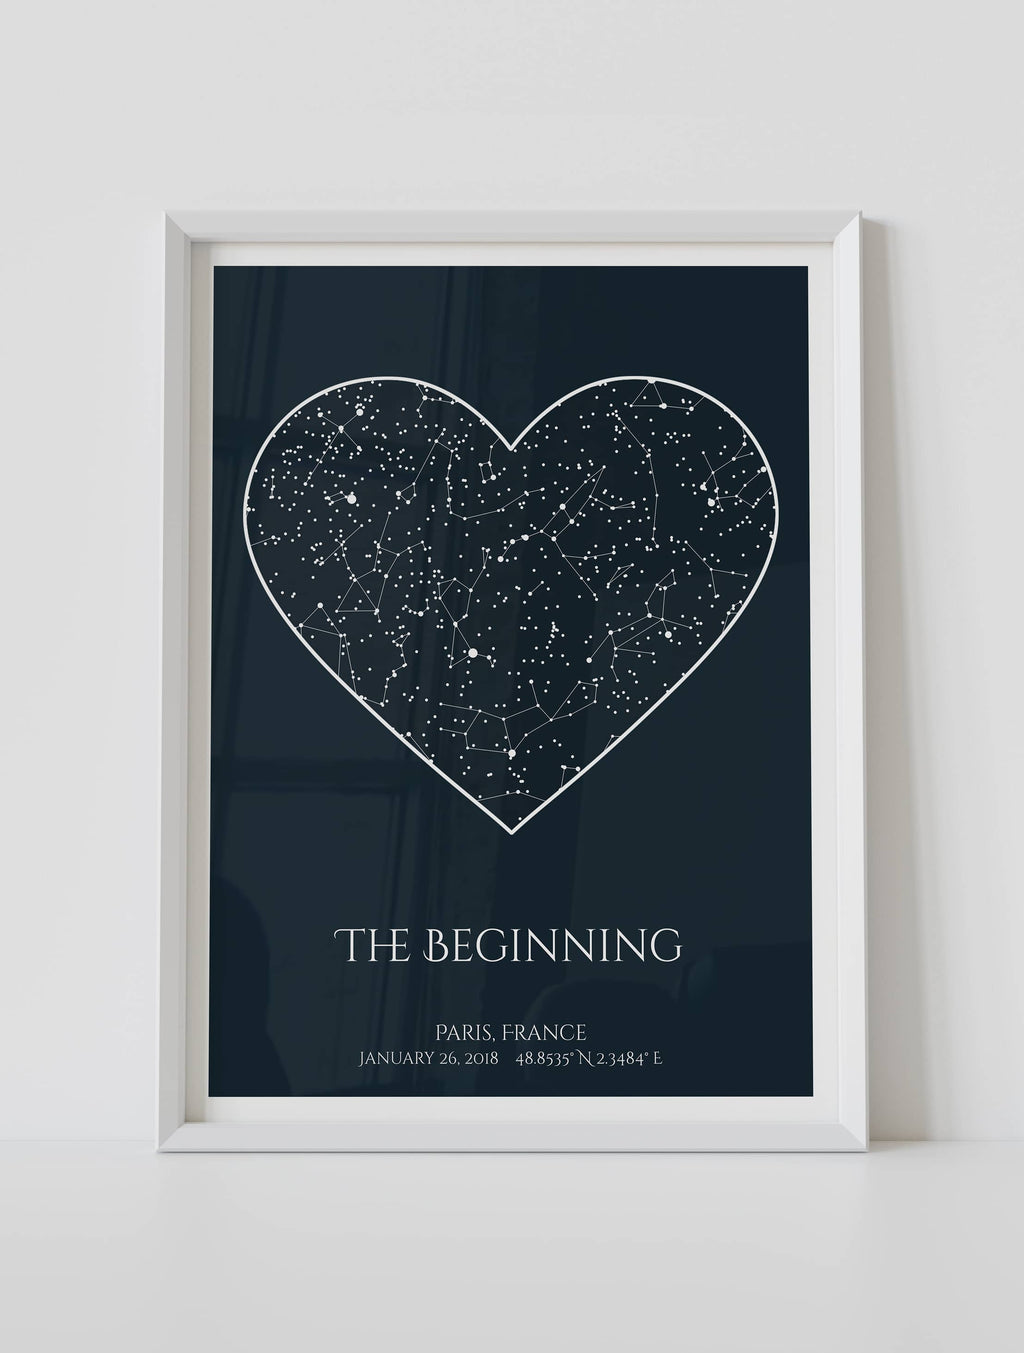 Framed star map poster, with a personalized quote "The beginning"